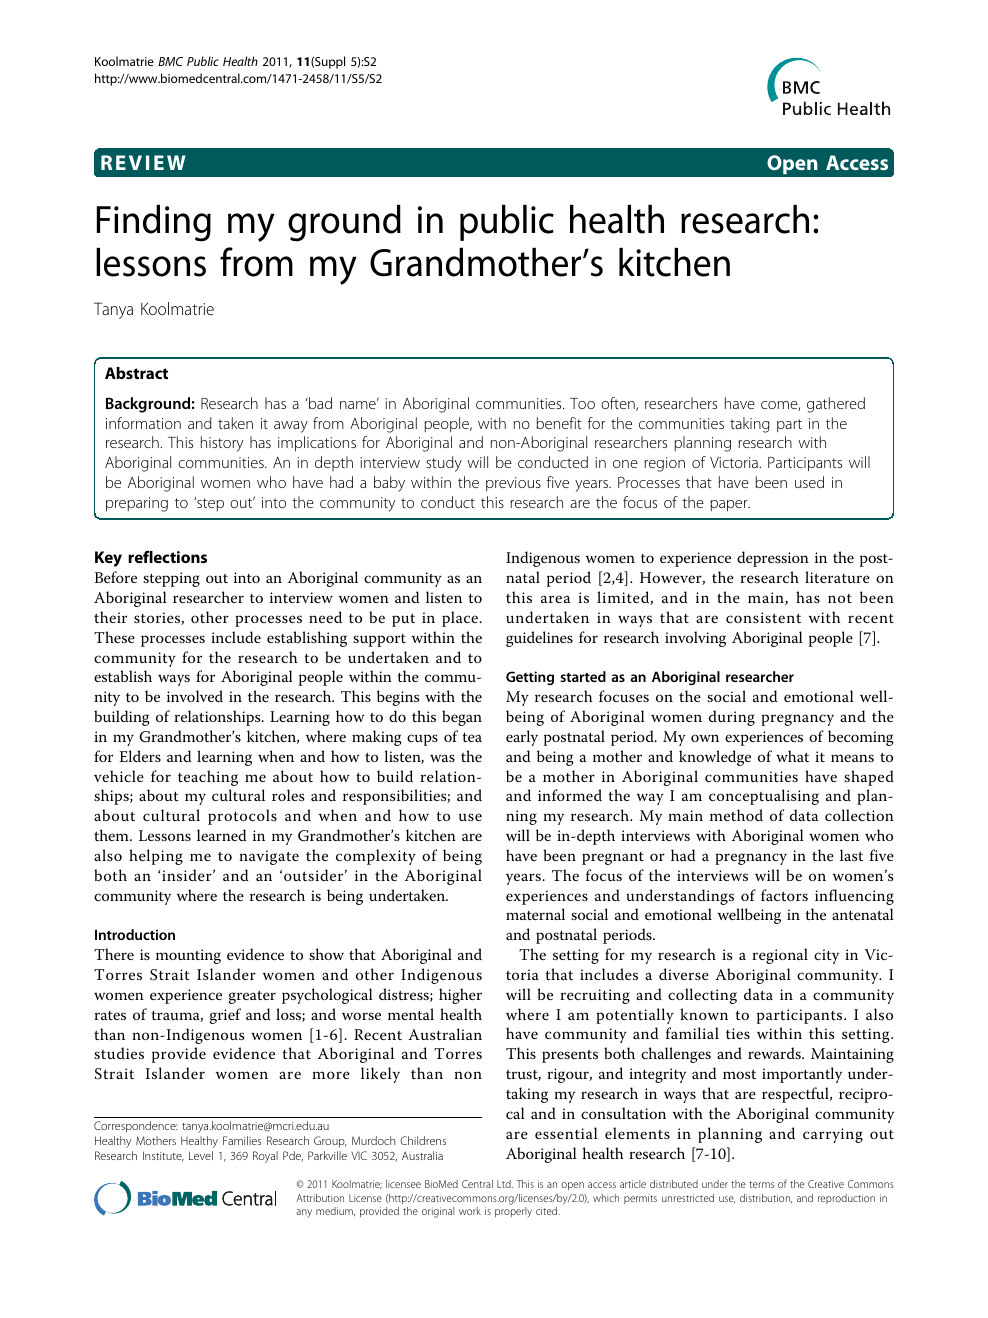 Niende forum pædagog Finding my ground in public health research: lessons from my Grandmother's  kitchen – topic of research paper in Psychology. Download scholarly article  PDF and read for free on CyberLeninka open science hub.